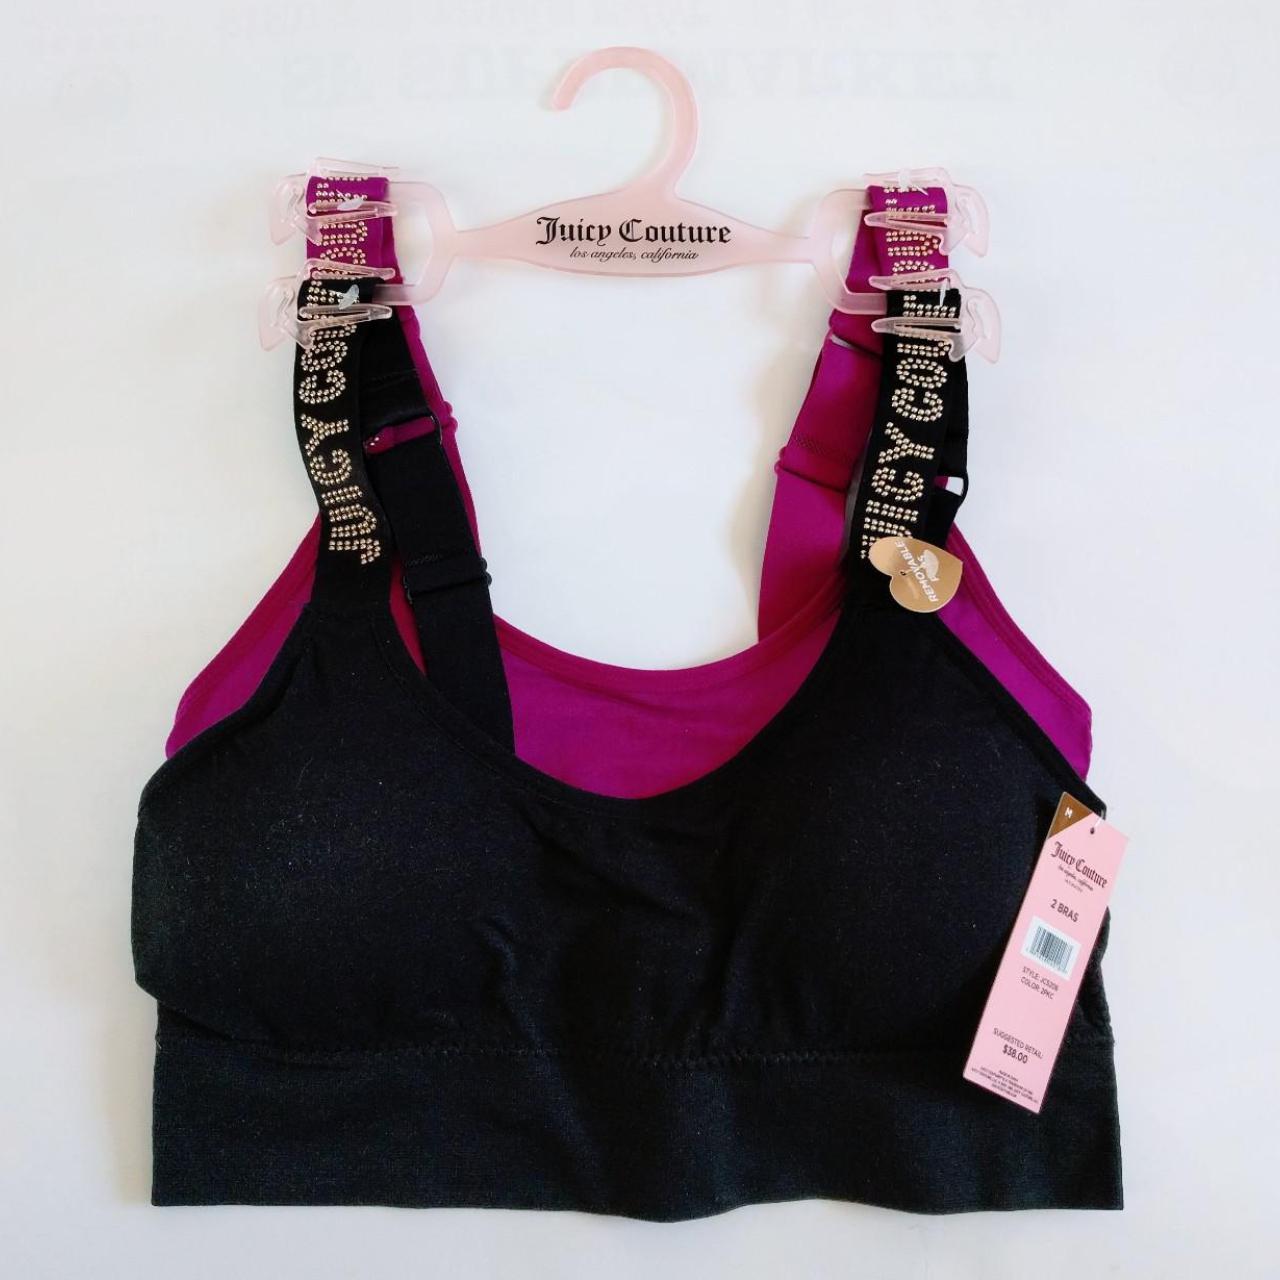 Juicy Couture, Intimates & Sleepwear, 2 Pack Juicy Couture Bra Show Me  Off 42d